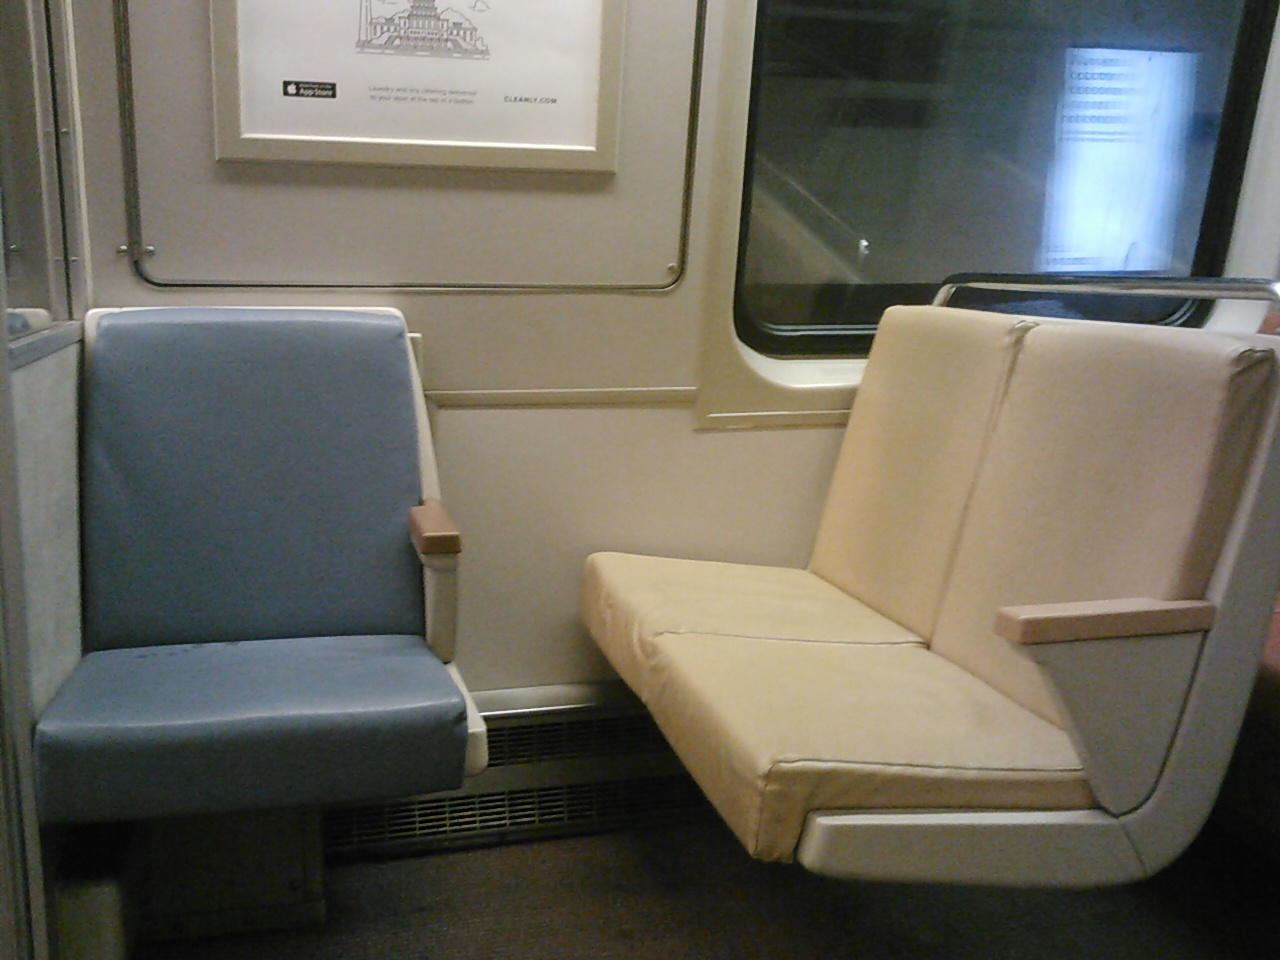 A
length-wise view of the same single seat. A nice use of extra space on the
1000 series cars by giving passengers a comfortable seat, and not shiny
metal walls to stare at while standing for a 45 minute commute! For
further details, please visit www.wirelessnotes.org.